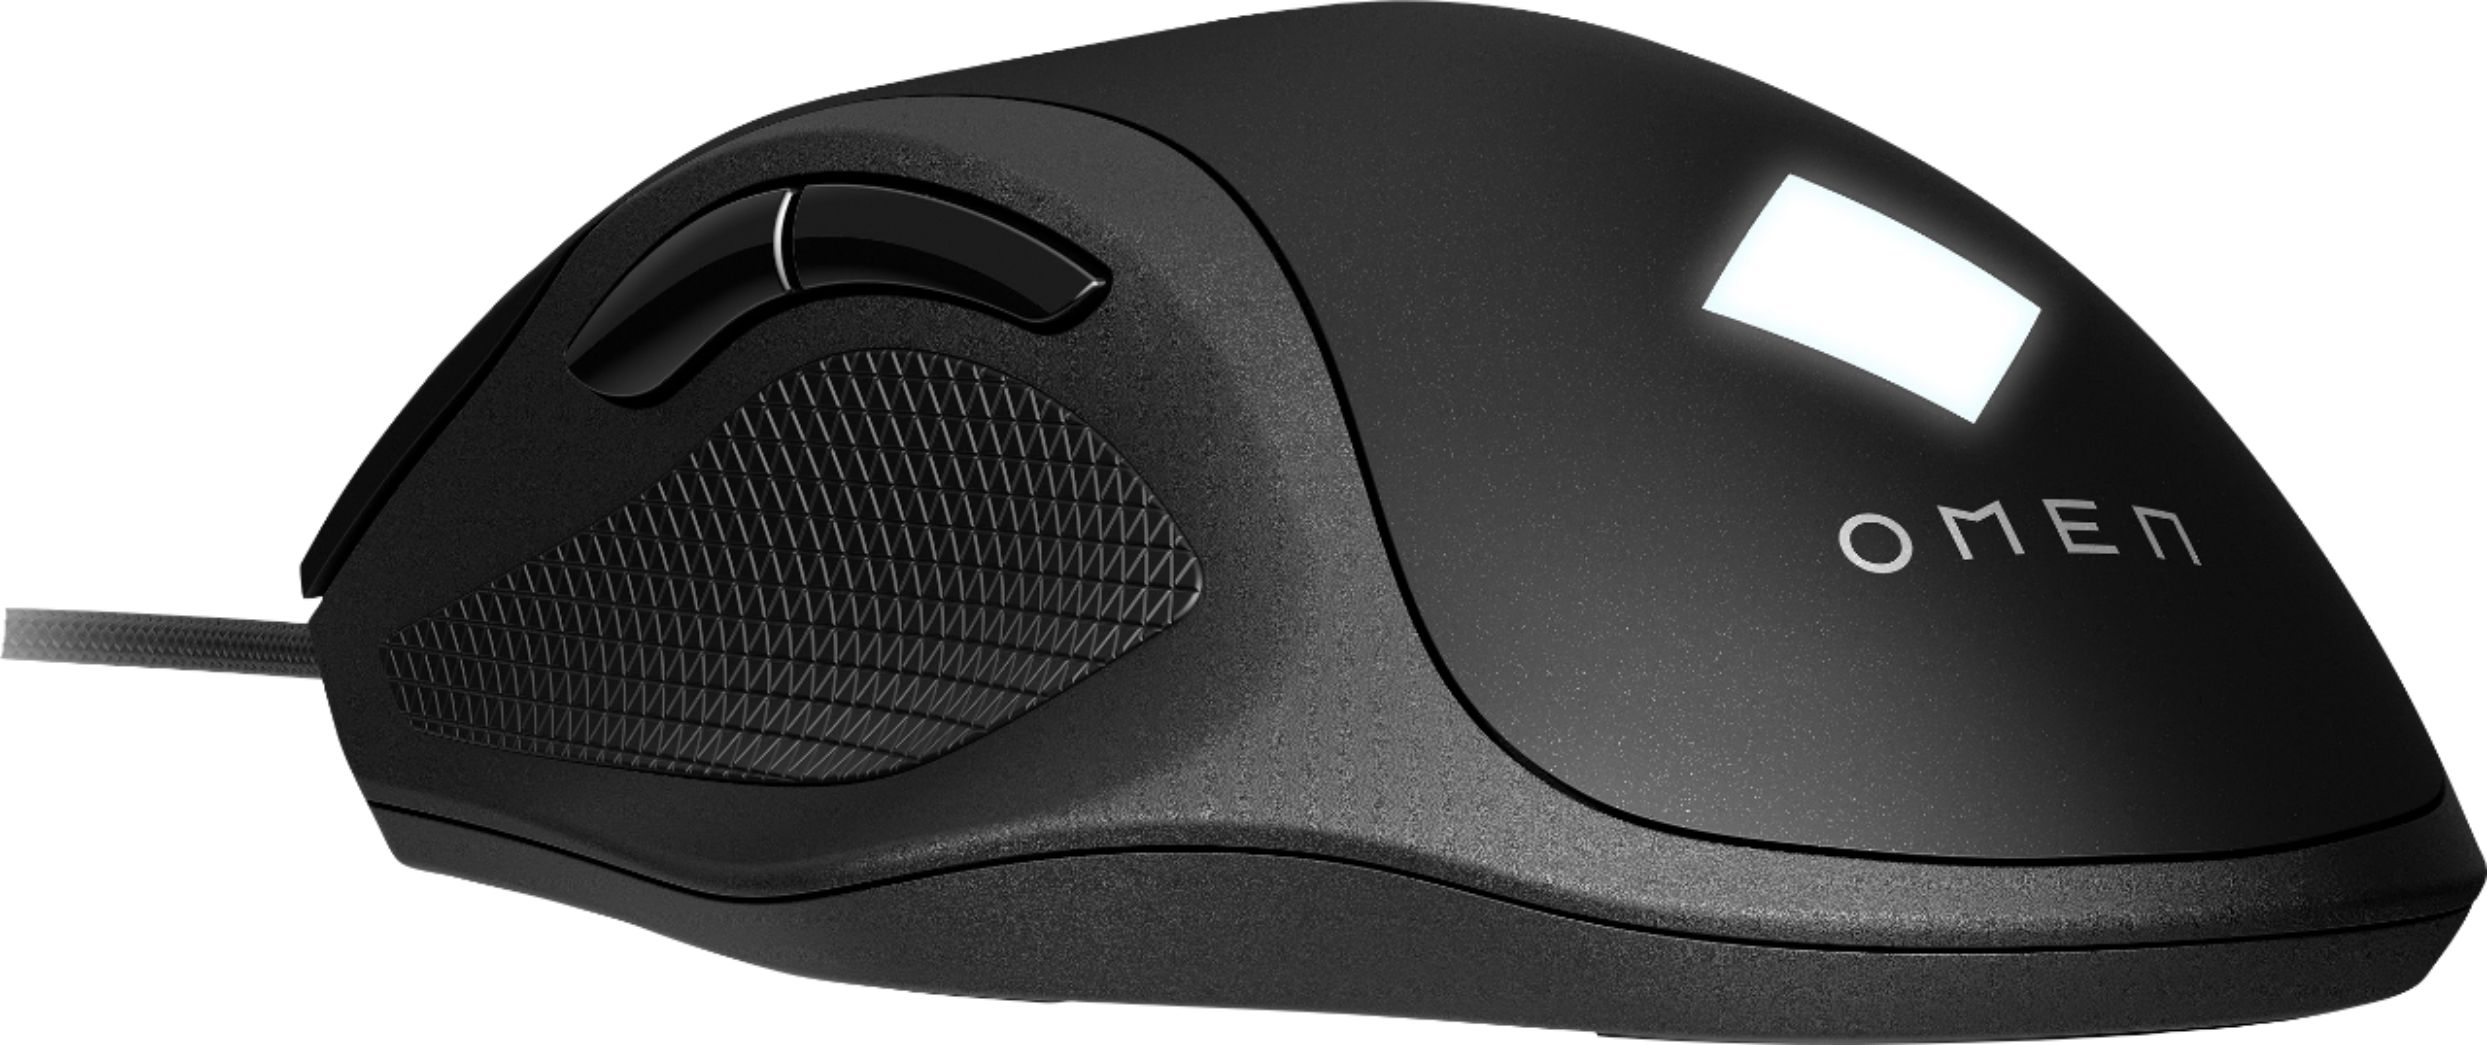 Back View: HP OMEN - Vector Wired Optical Gaming Mouse with Adjustable Weight - Black